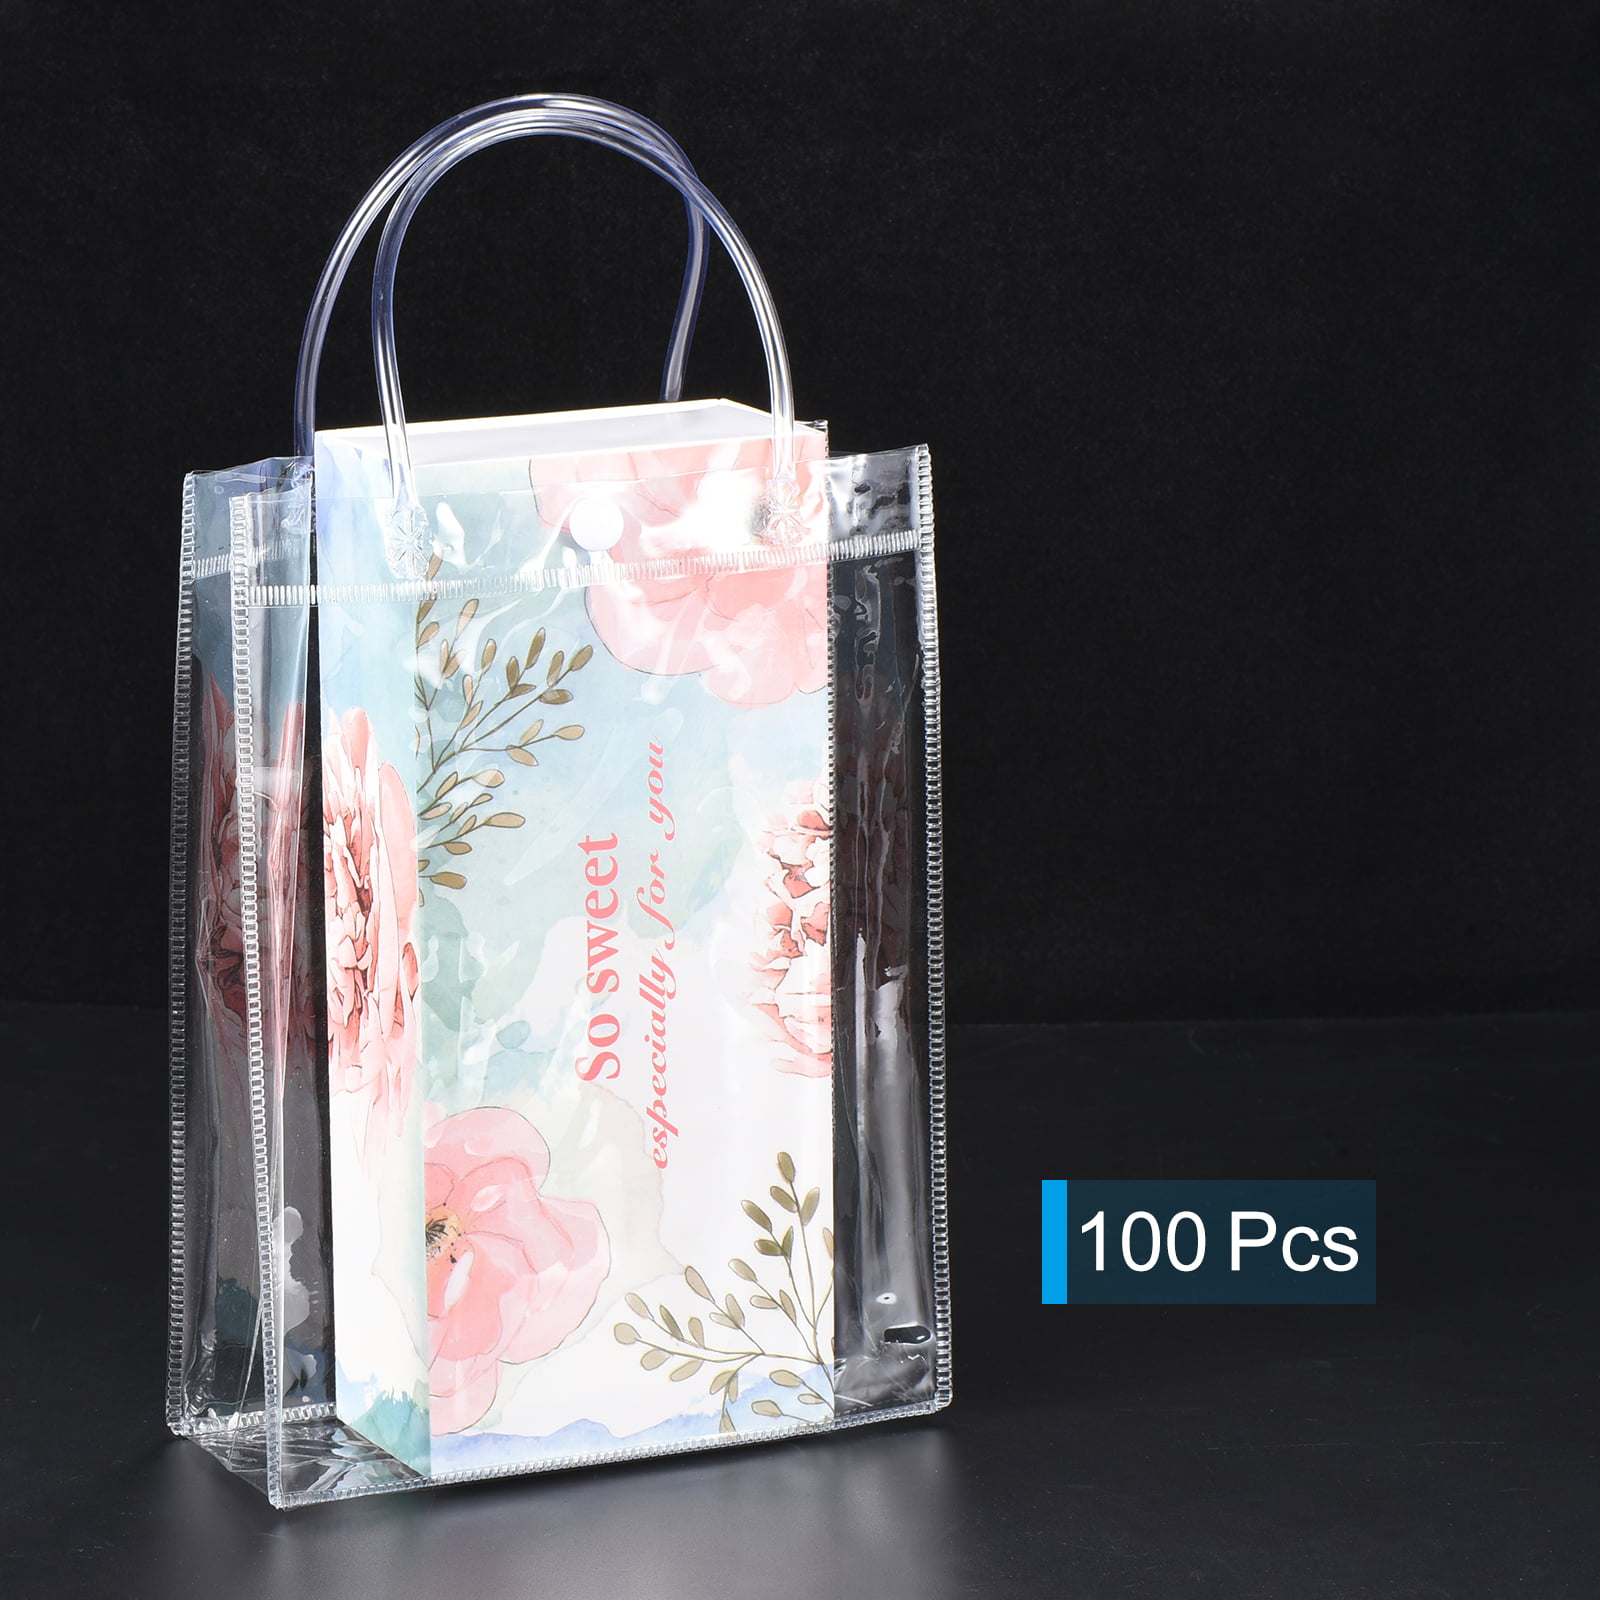 12 Pcs small gift bags with handles Practical Clear PVC Bags Gift Wrapping  Bags